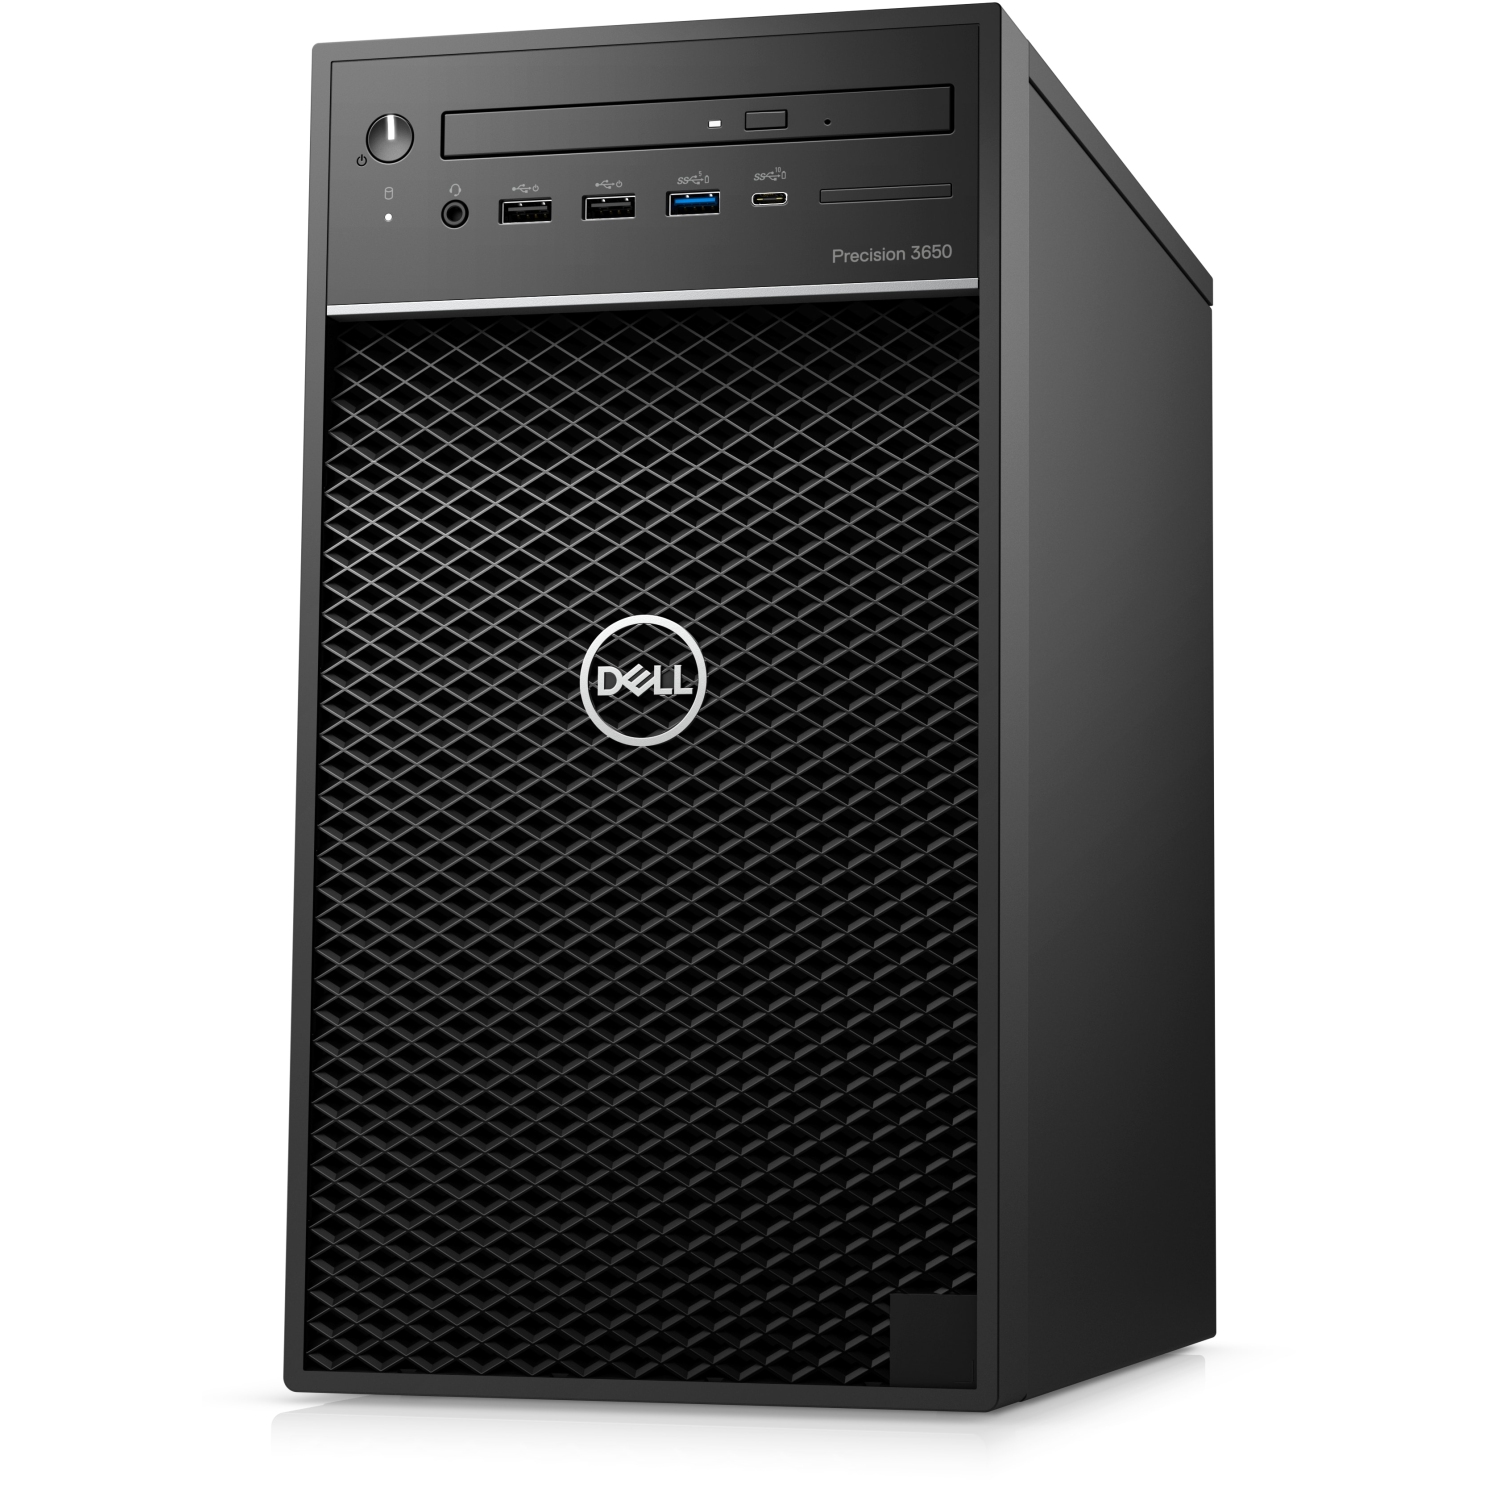 Refurbished (Excellent) - Dell Precision T3650 Workstation Desktop (2021), Core i9, 256GB SSD, 32GB RAM, RTX 3090, 8 Cores @ 5.3 GHz, 11th Gen CPU Certified Refurbished